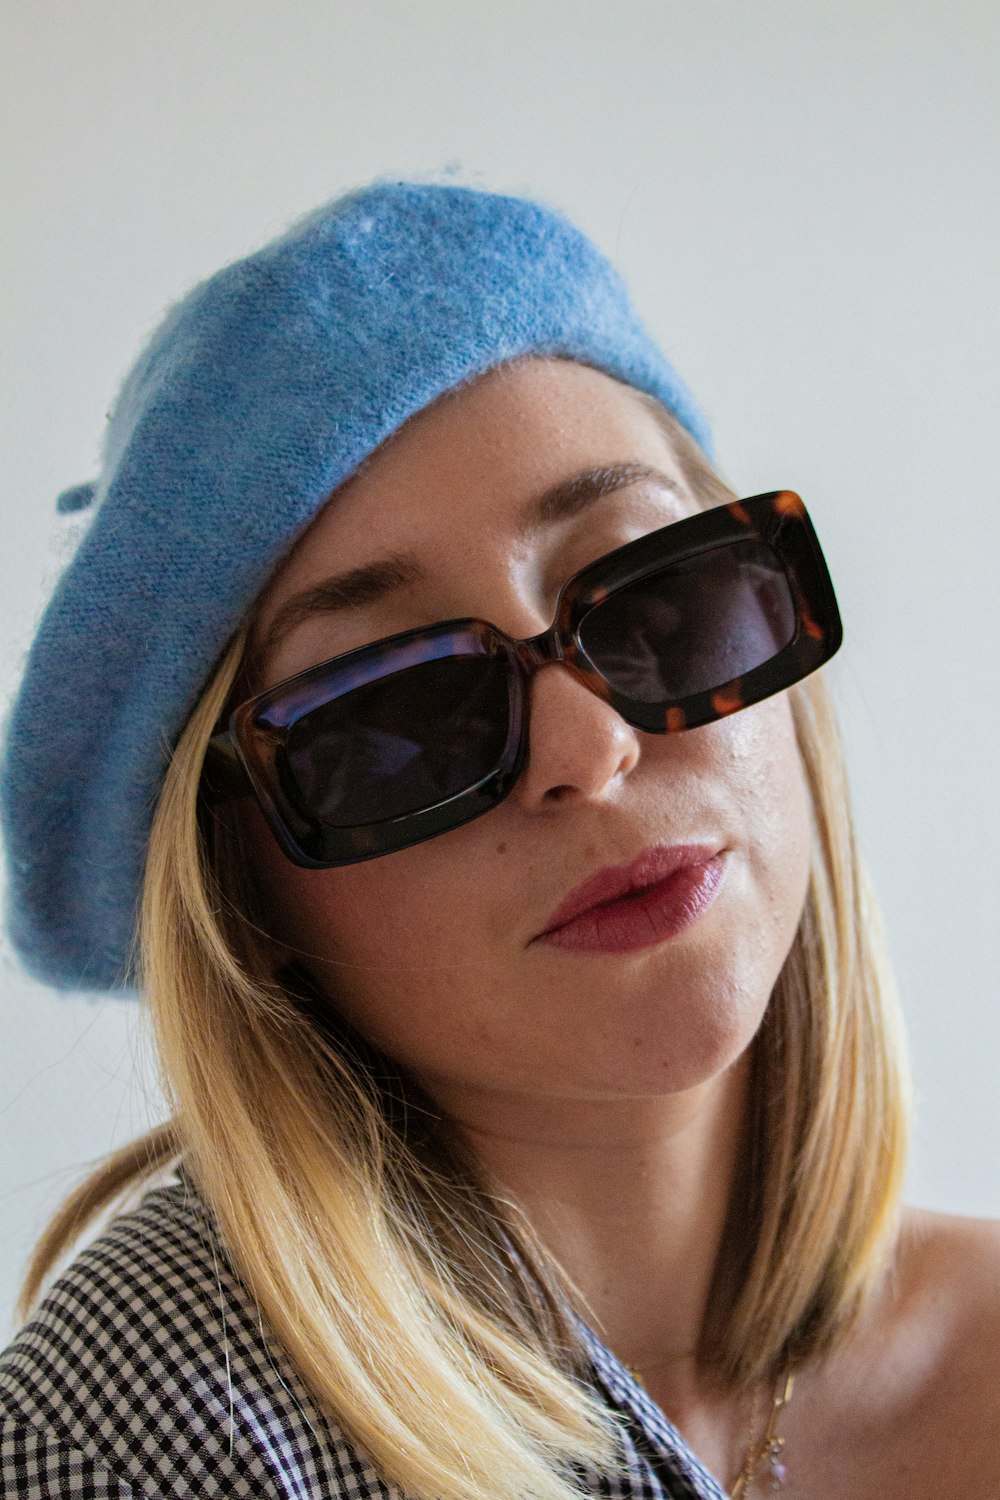 a woman wearing a blue hat and sunglasses